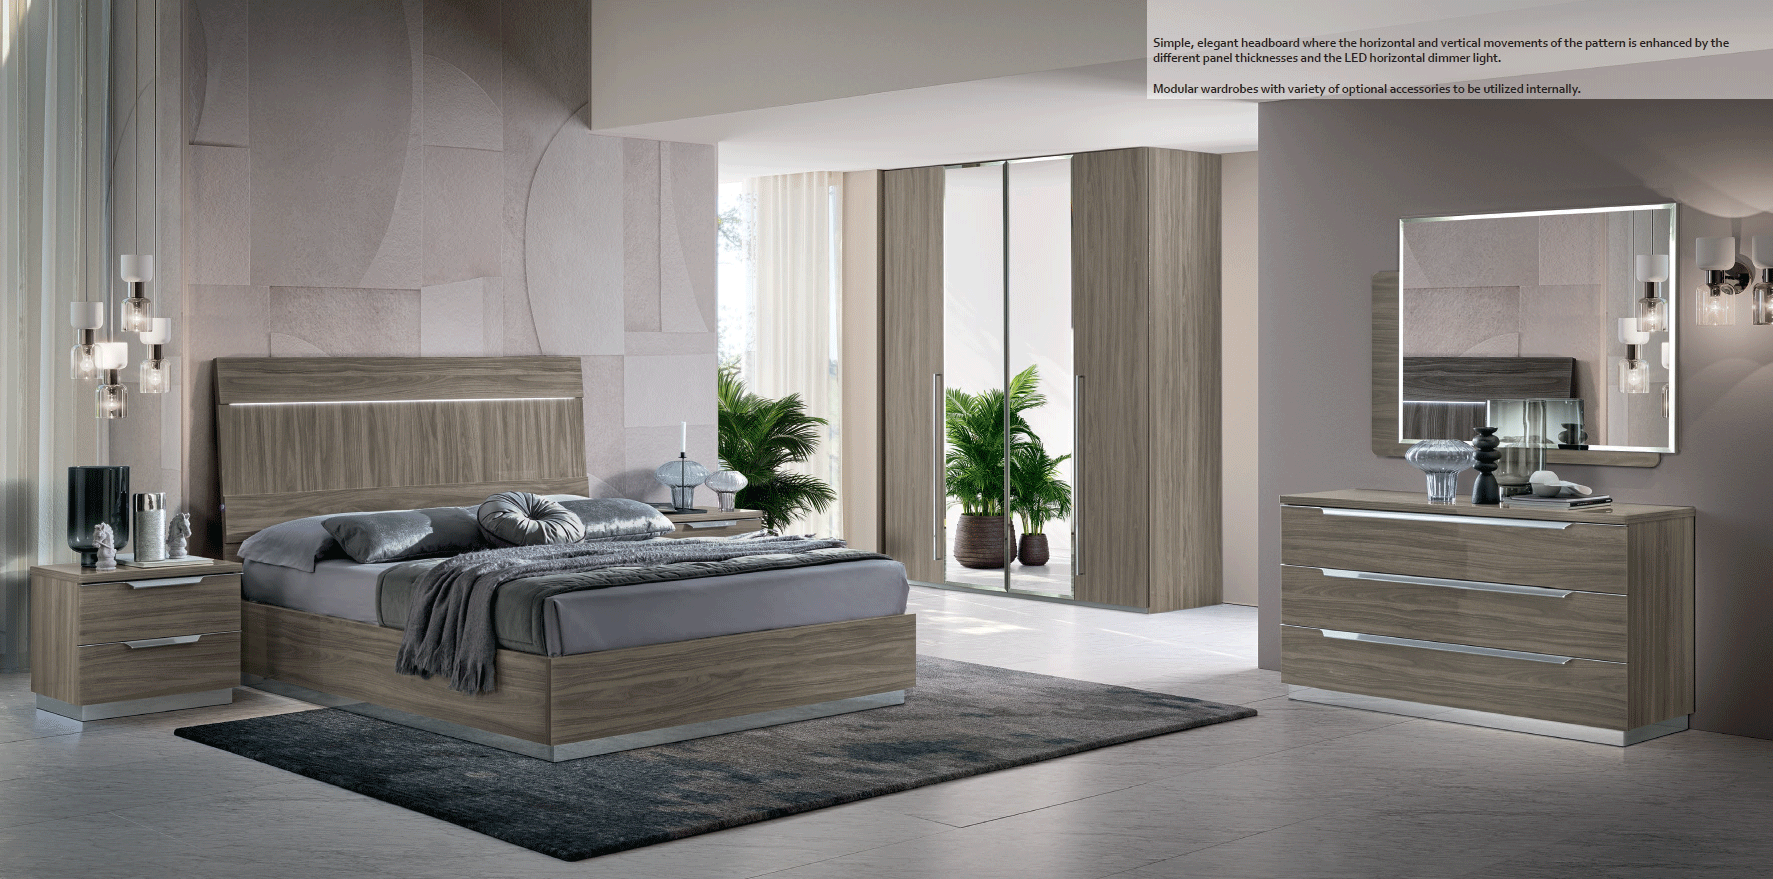 Brands Camel Classic Collection, Italy Kroma Bedroom GREY Additional Items